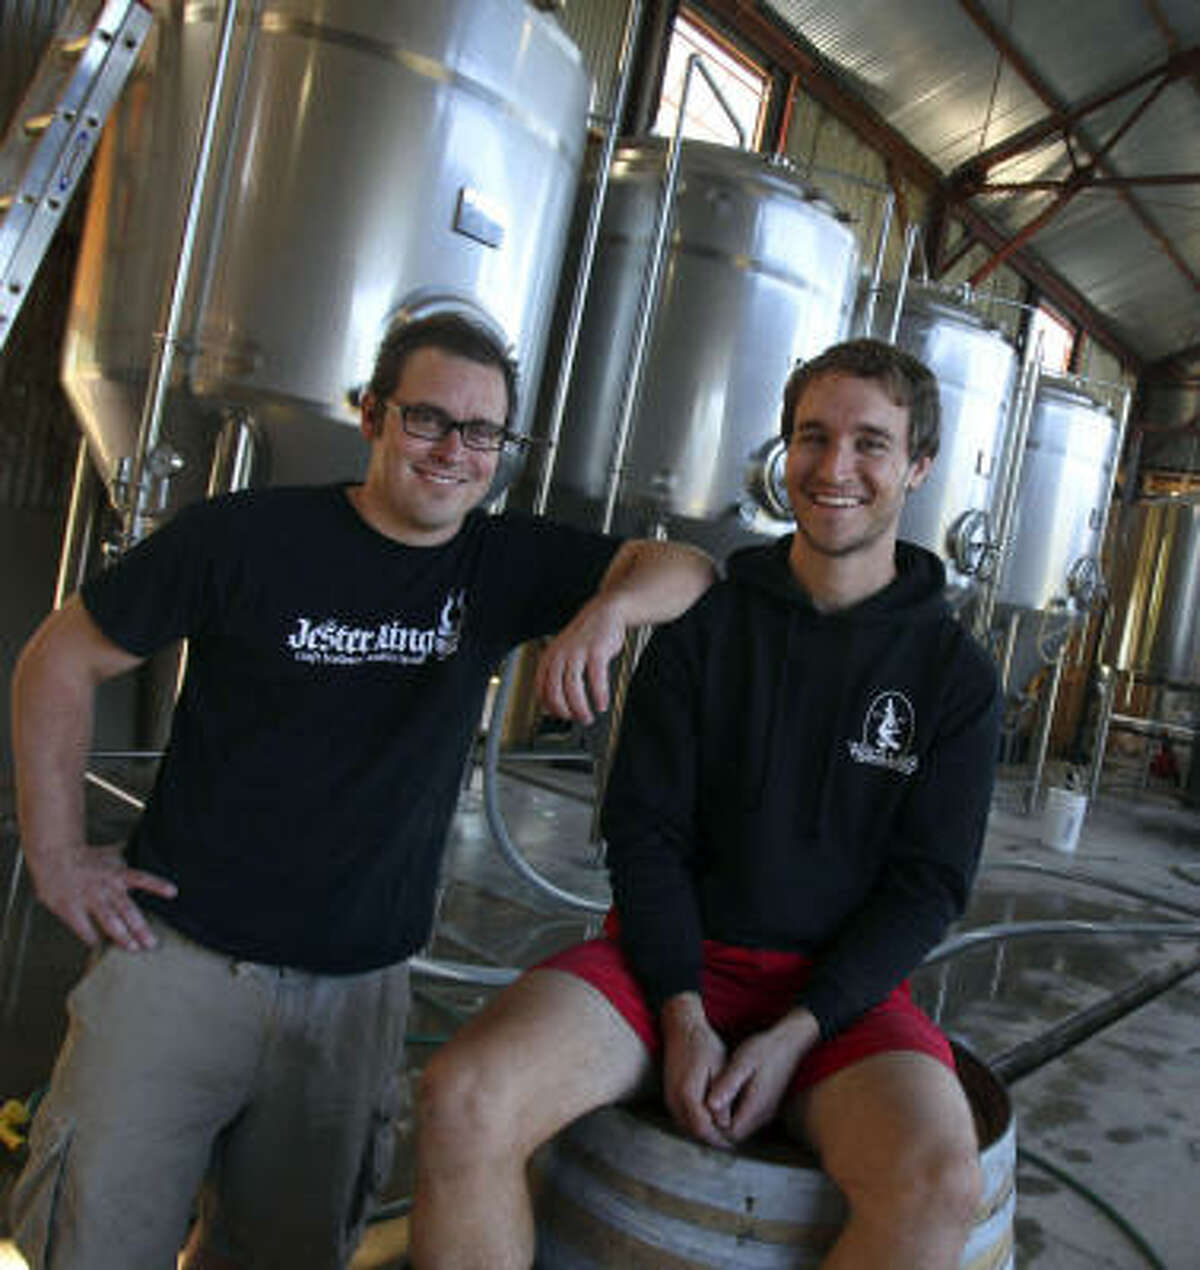 Brothers Jeff and Michael Stuffings recently opened the Jester King Craft Brewery west of Austin near Dripping Springs. They left behind the corporate world to open their craft brewery, the latest of 12 now operating in Texas.